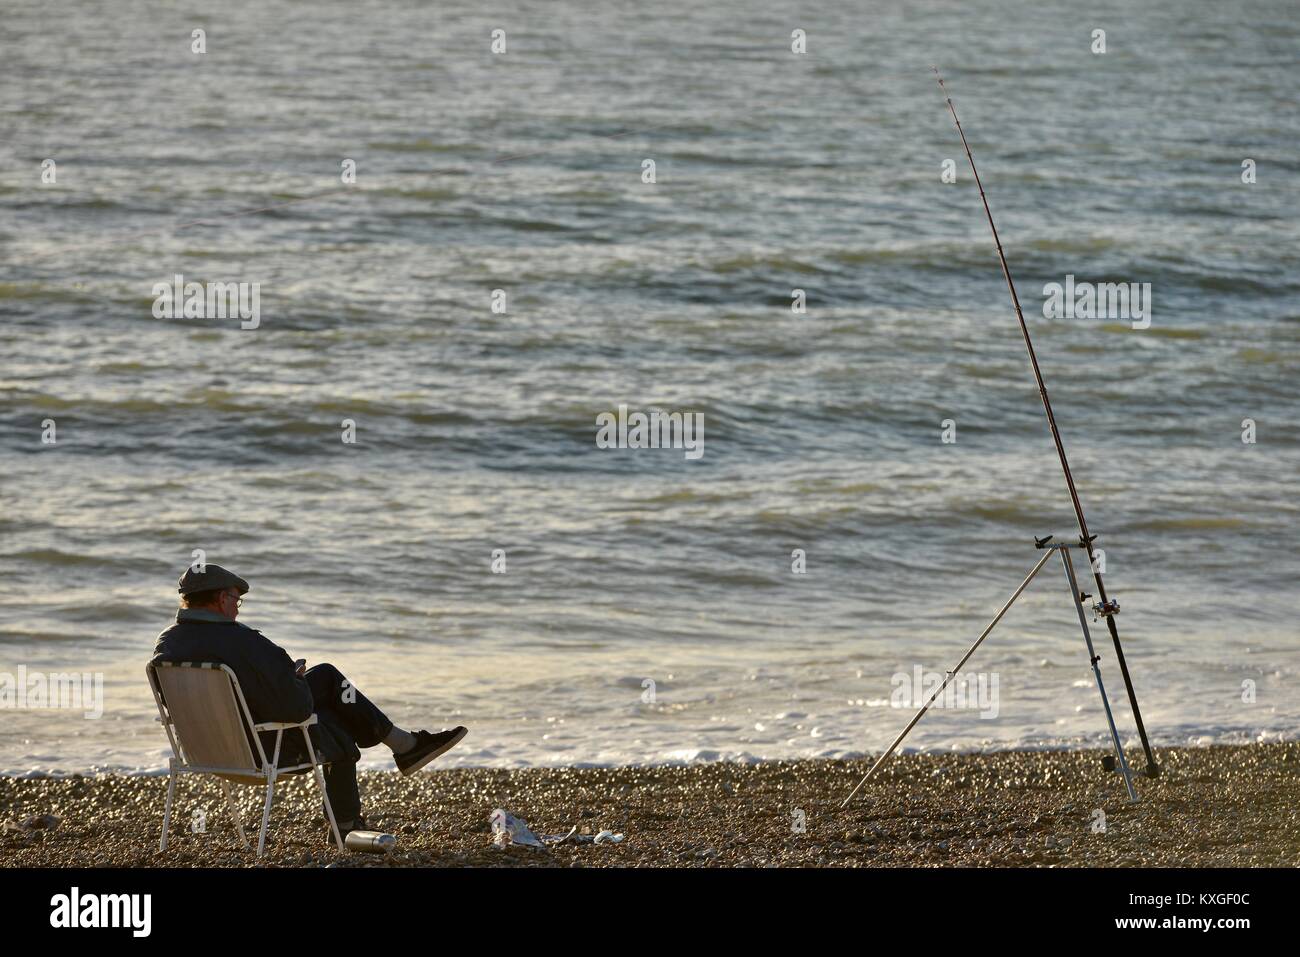 Seaford, East Sussex. 10th January 2018. People enjoying the sun in Seaford, UK after days of wet and gloomy weather, Credit: Peter Cripps/Alamy Live News Stock Photo